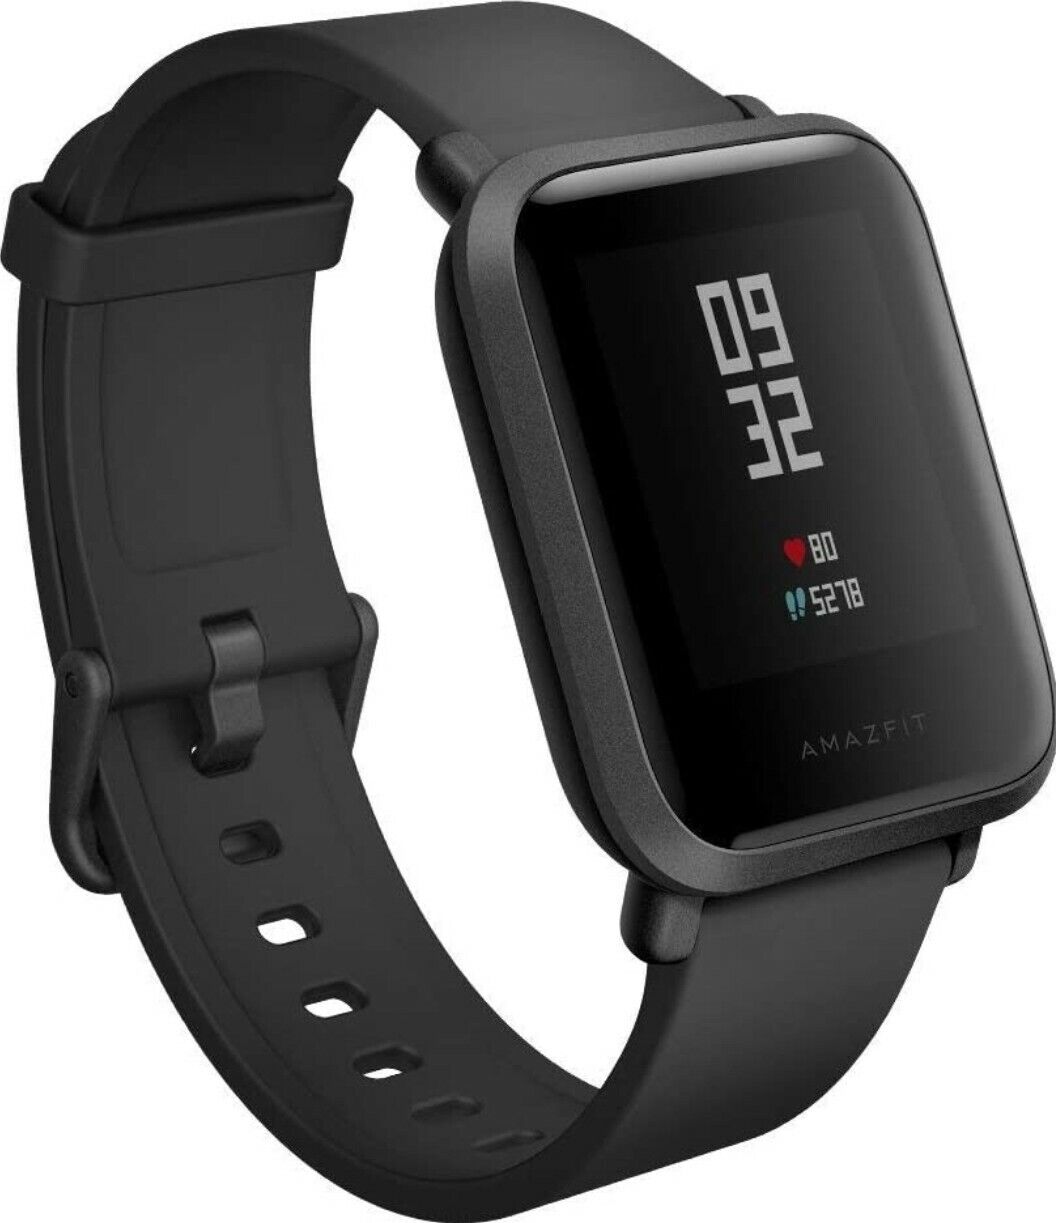 Amazfit A1608B Bip Smartwatch, Activity Tracker, GPS, 30 Day Charge (Black onyx) Populair zelfgemaakt